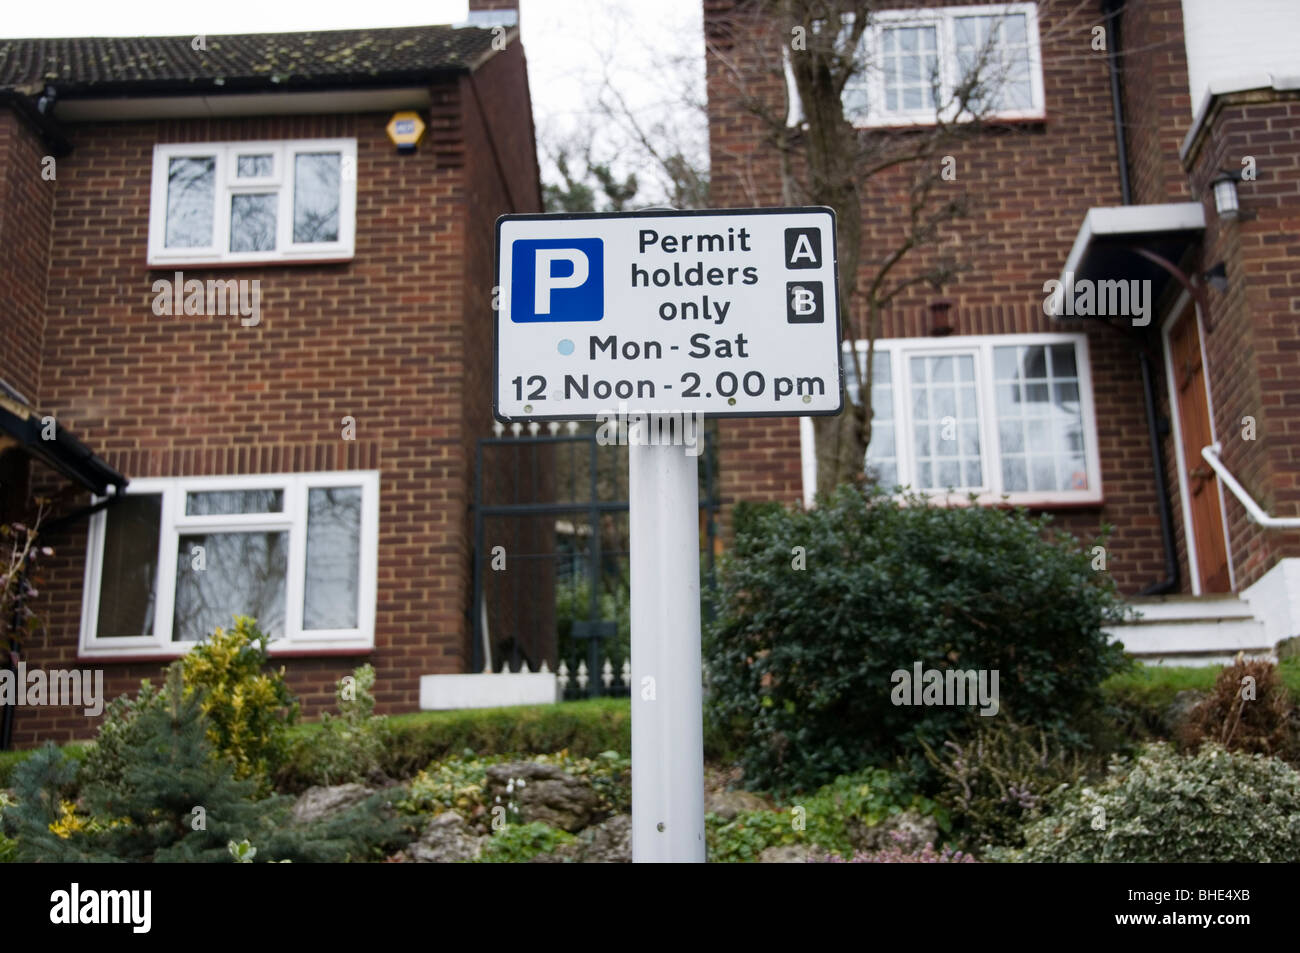 A residents parking sign - Permit Holders only - in Bromley, South London Stock Photo